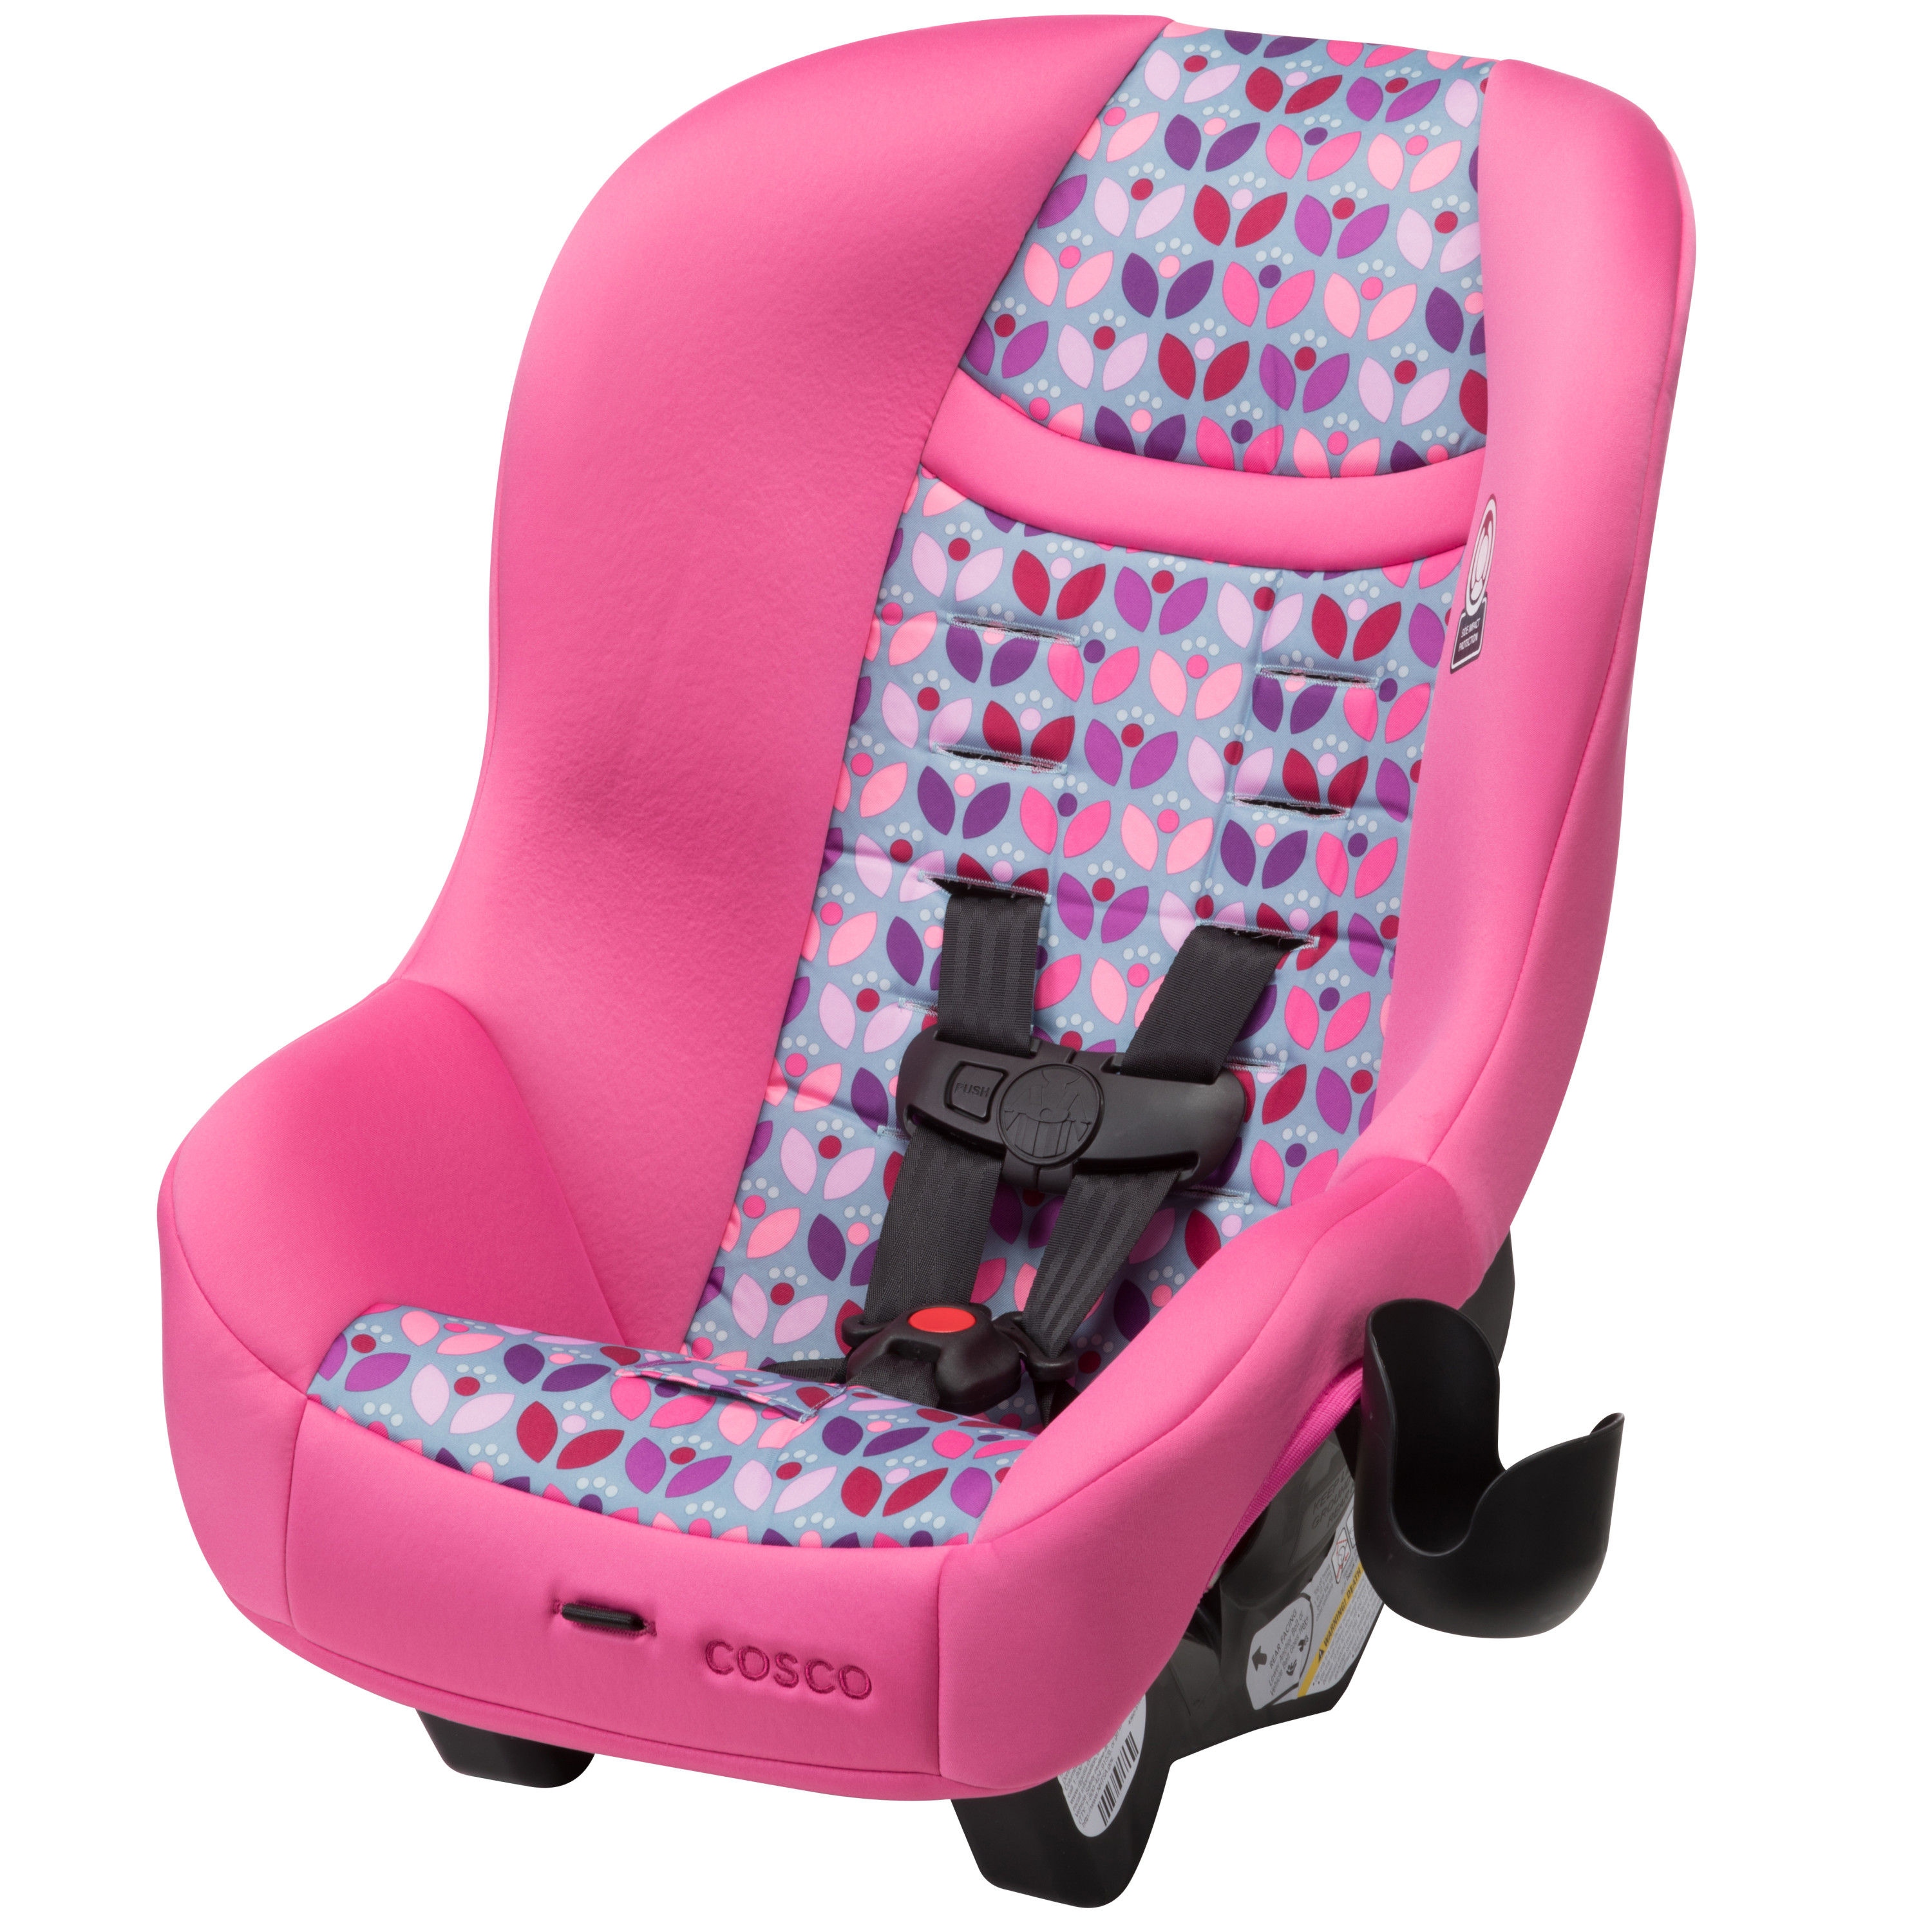 Cosco Scenera Convertible Car Seat, Floral Pink - image 1 of 12